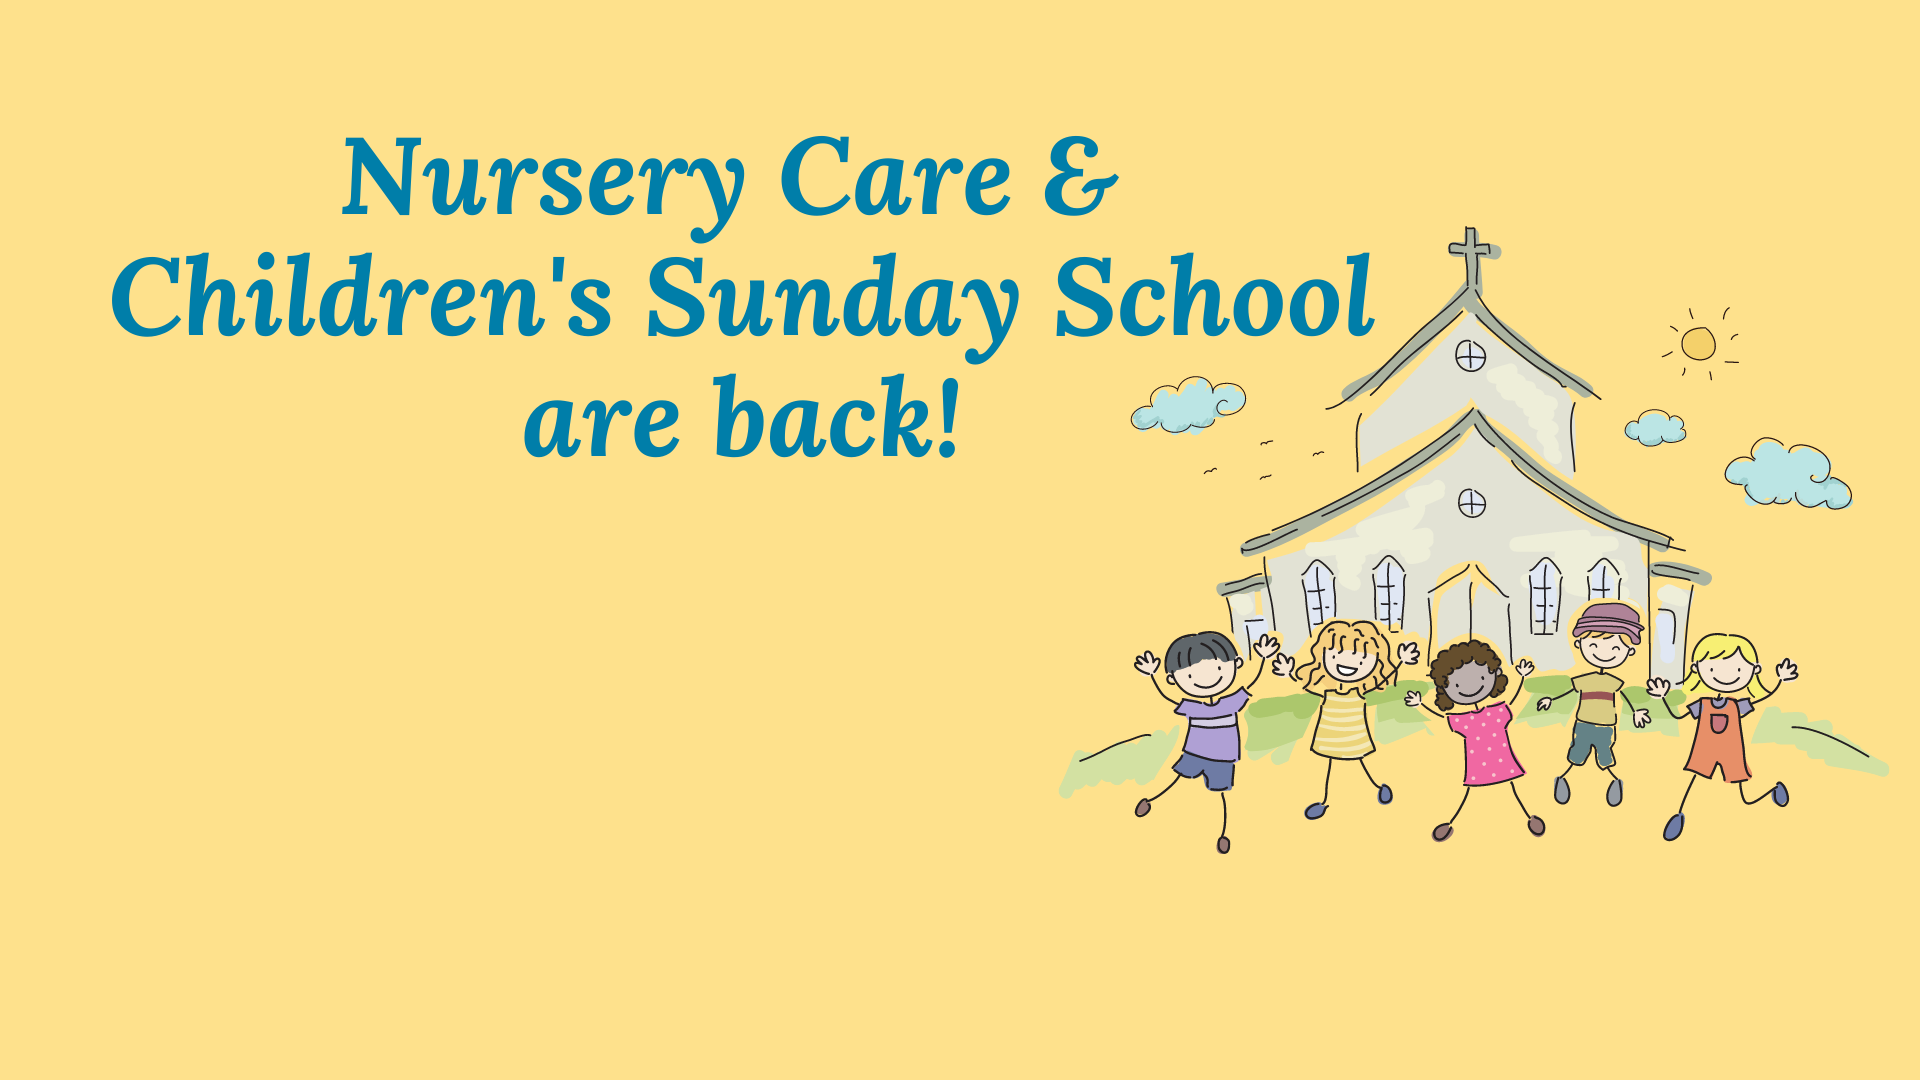 Click here to view our schedule for Nursery Care and Children's Sunday School